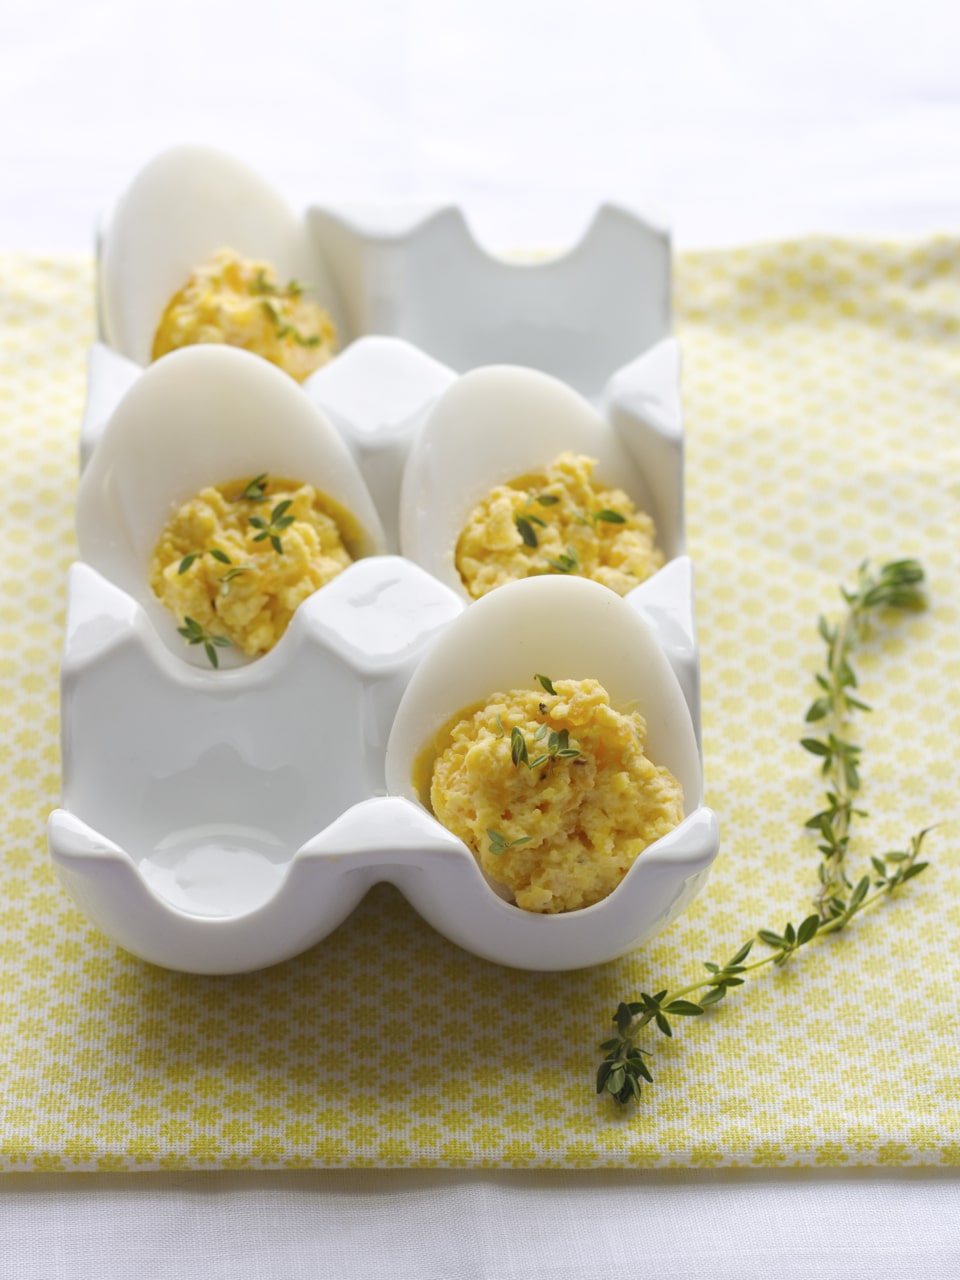 Devilled Eggs with Truffle Oil and Smoked Salt